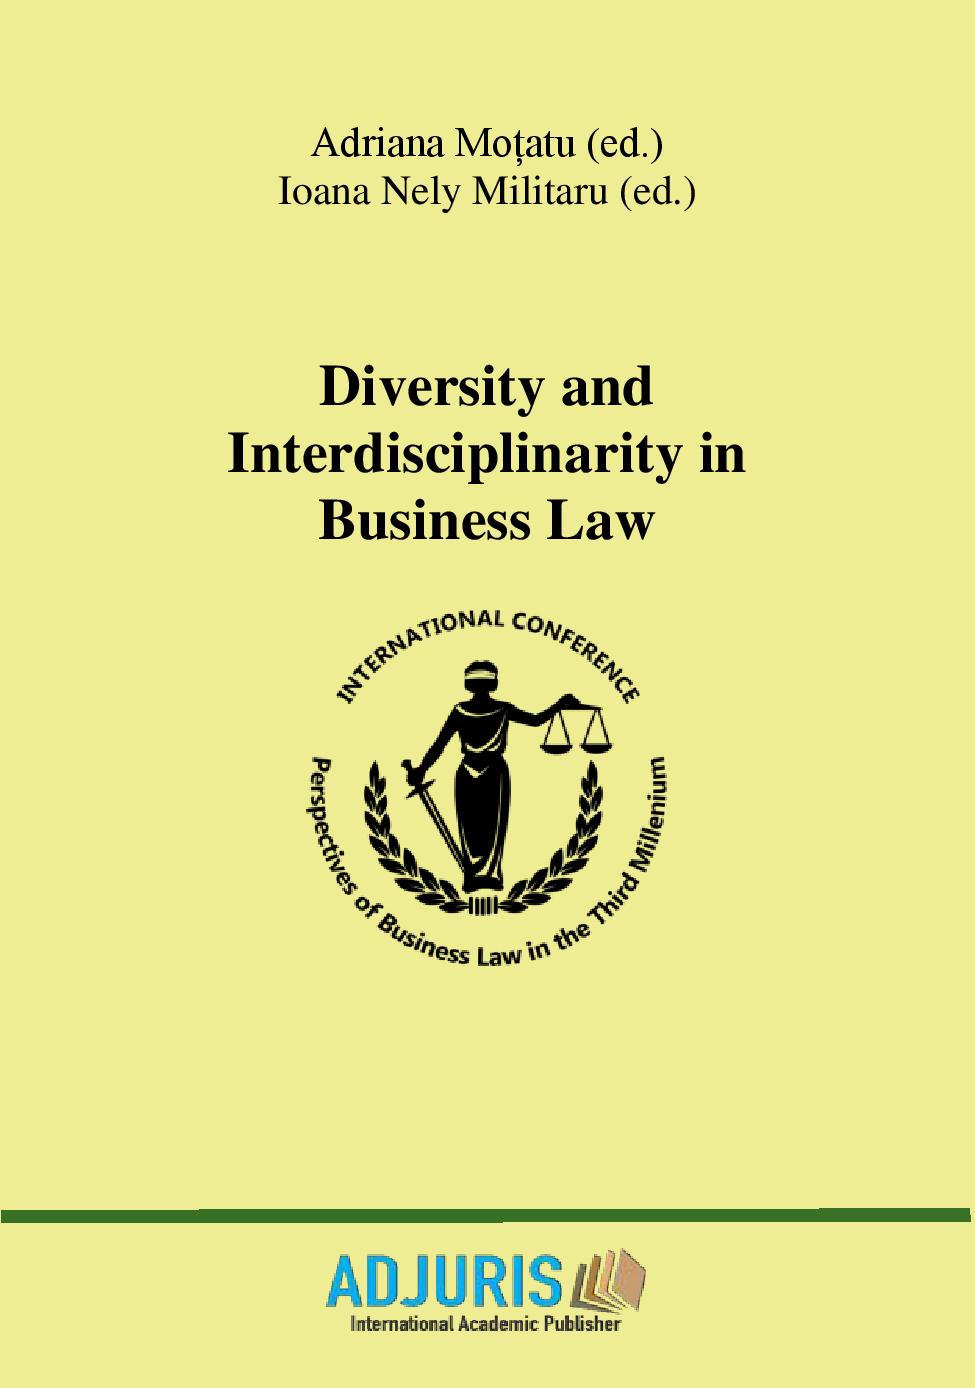 Diversity and Interdisciplinarity in Business Law